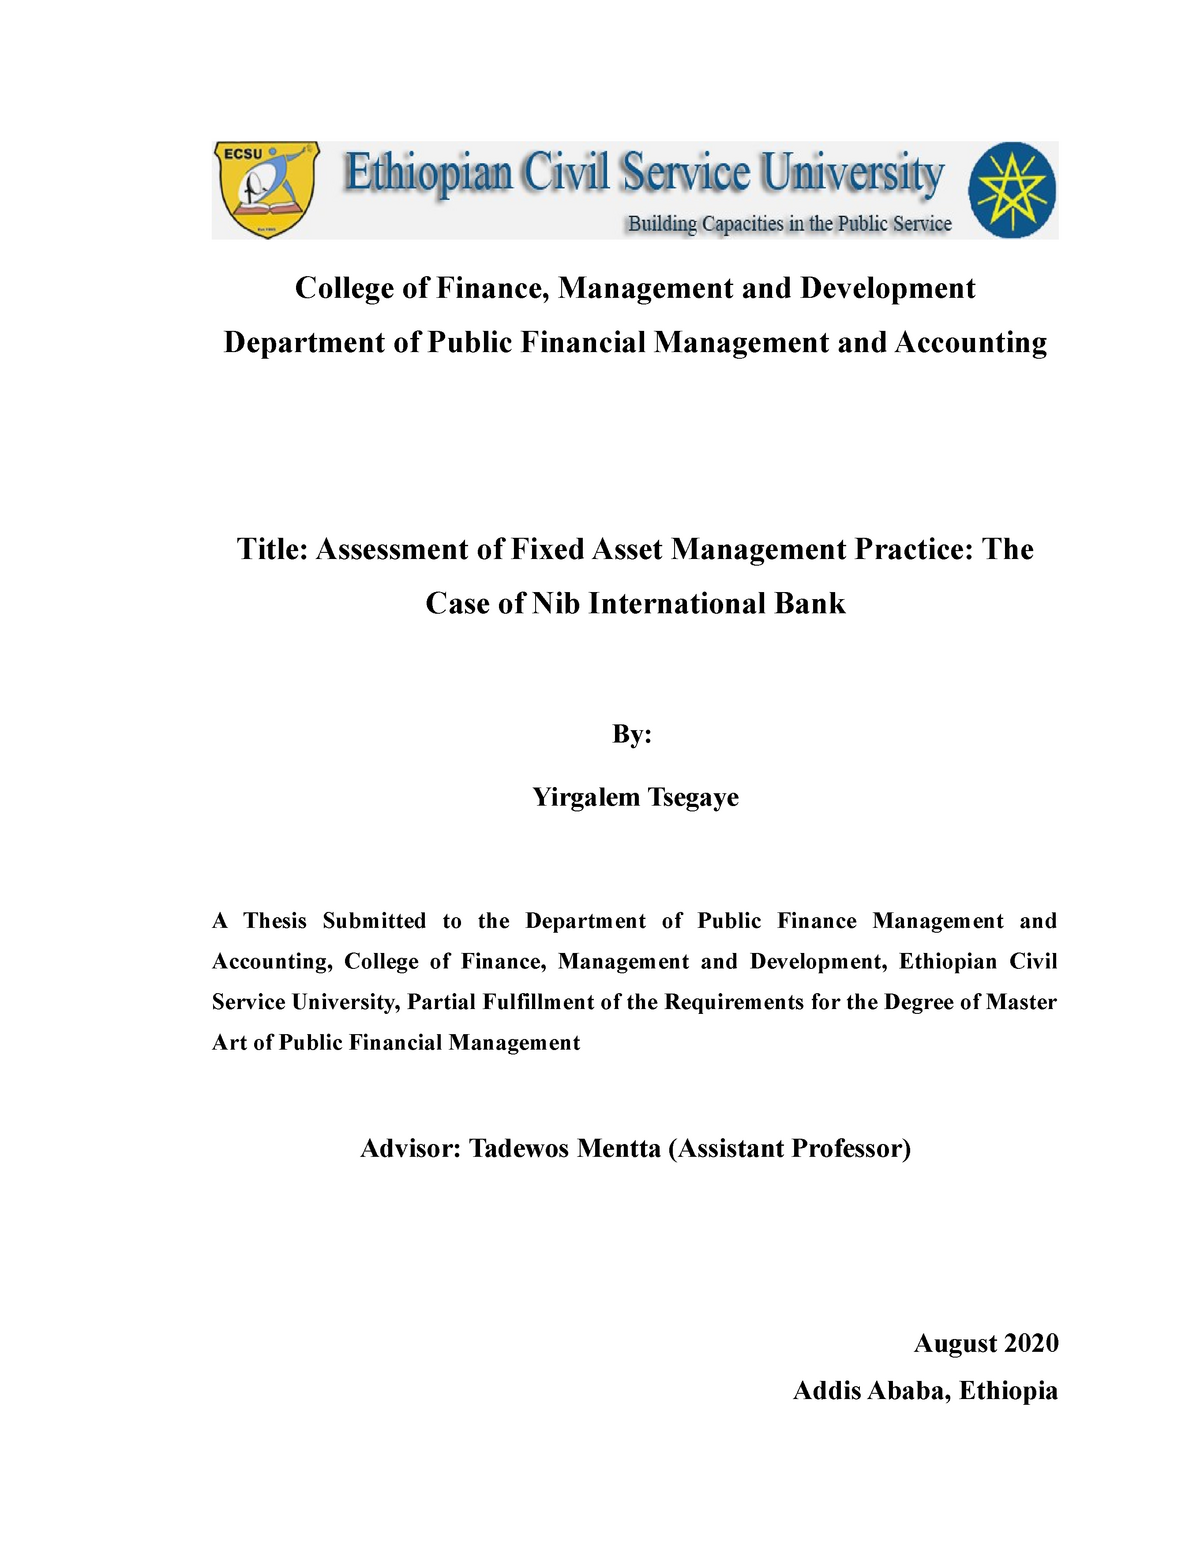 thesis topics about financial management